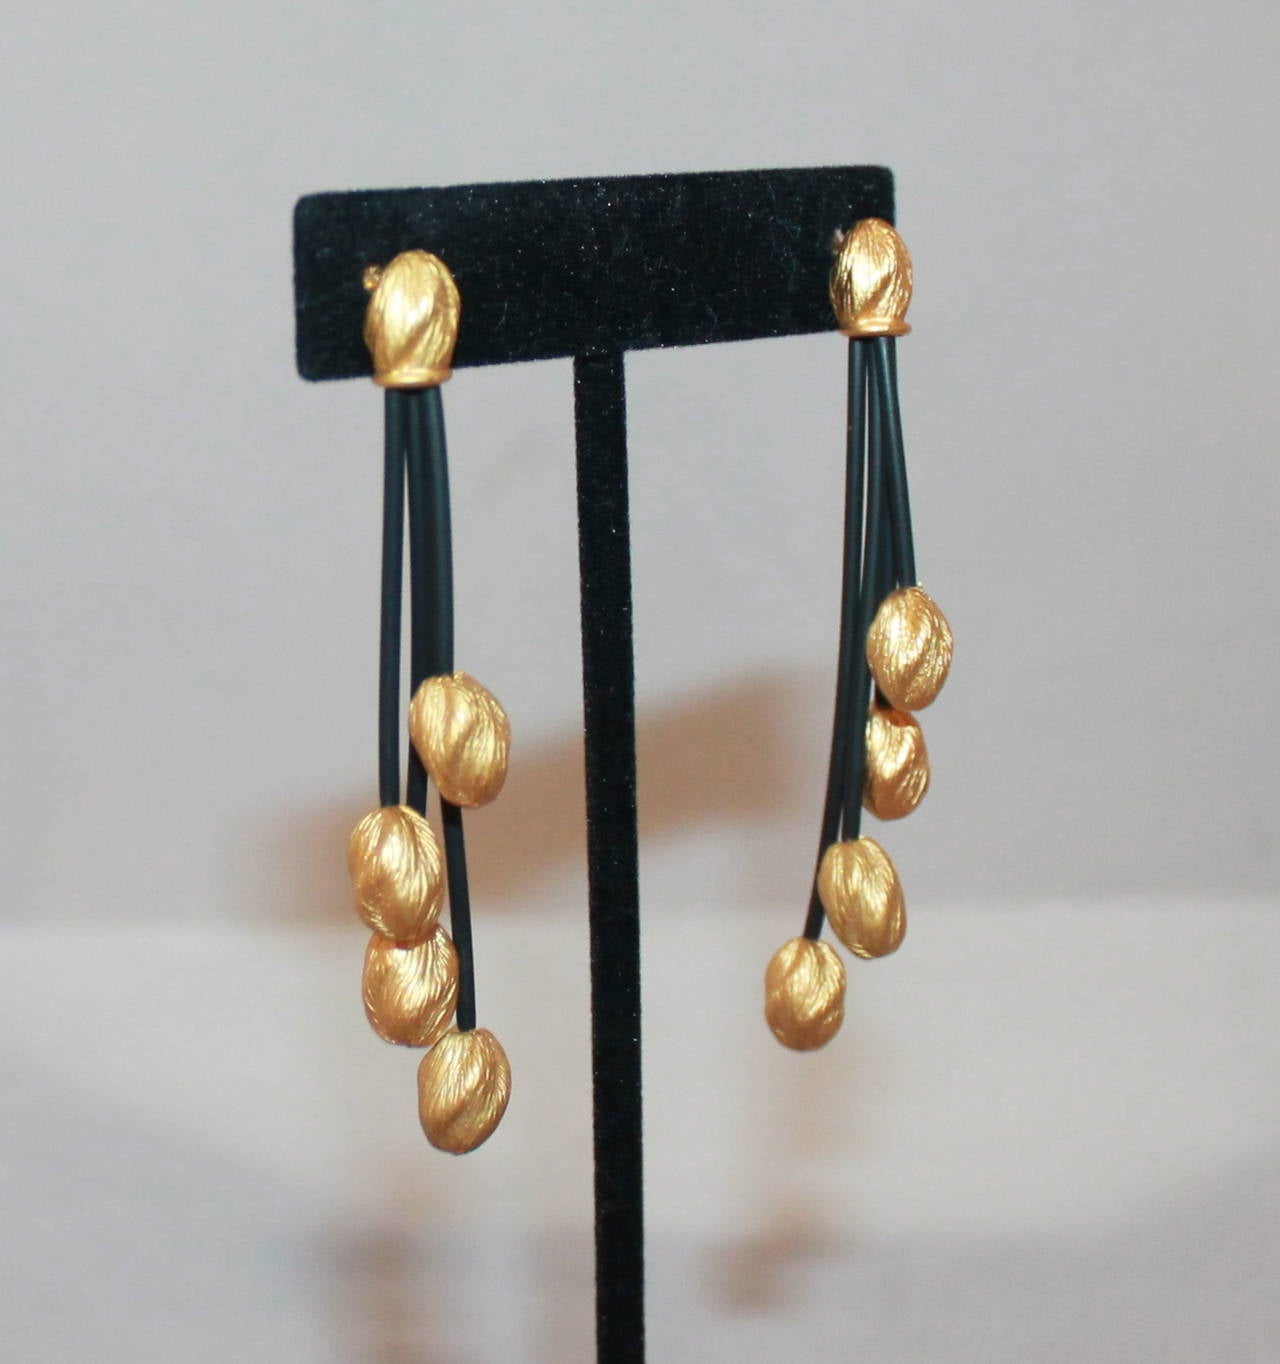 Roberto Coin Black Rubber & 18K Gold Drop Earrings. These earrings are in excellent condition.

Length- 2.5